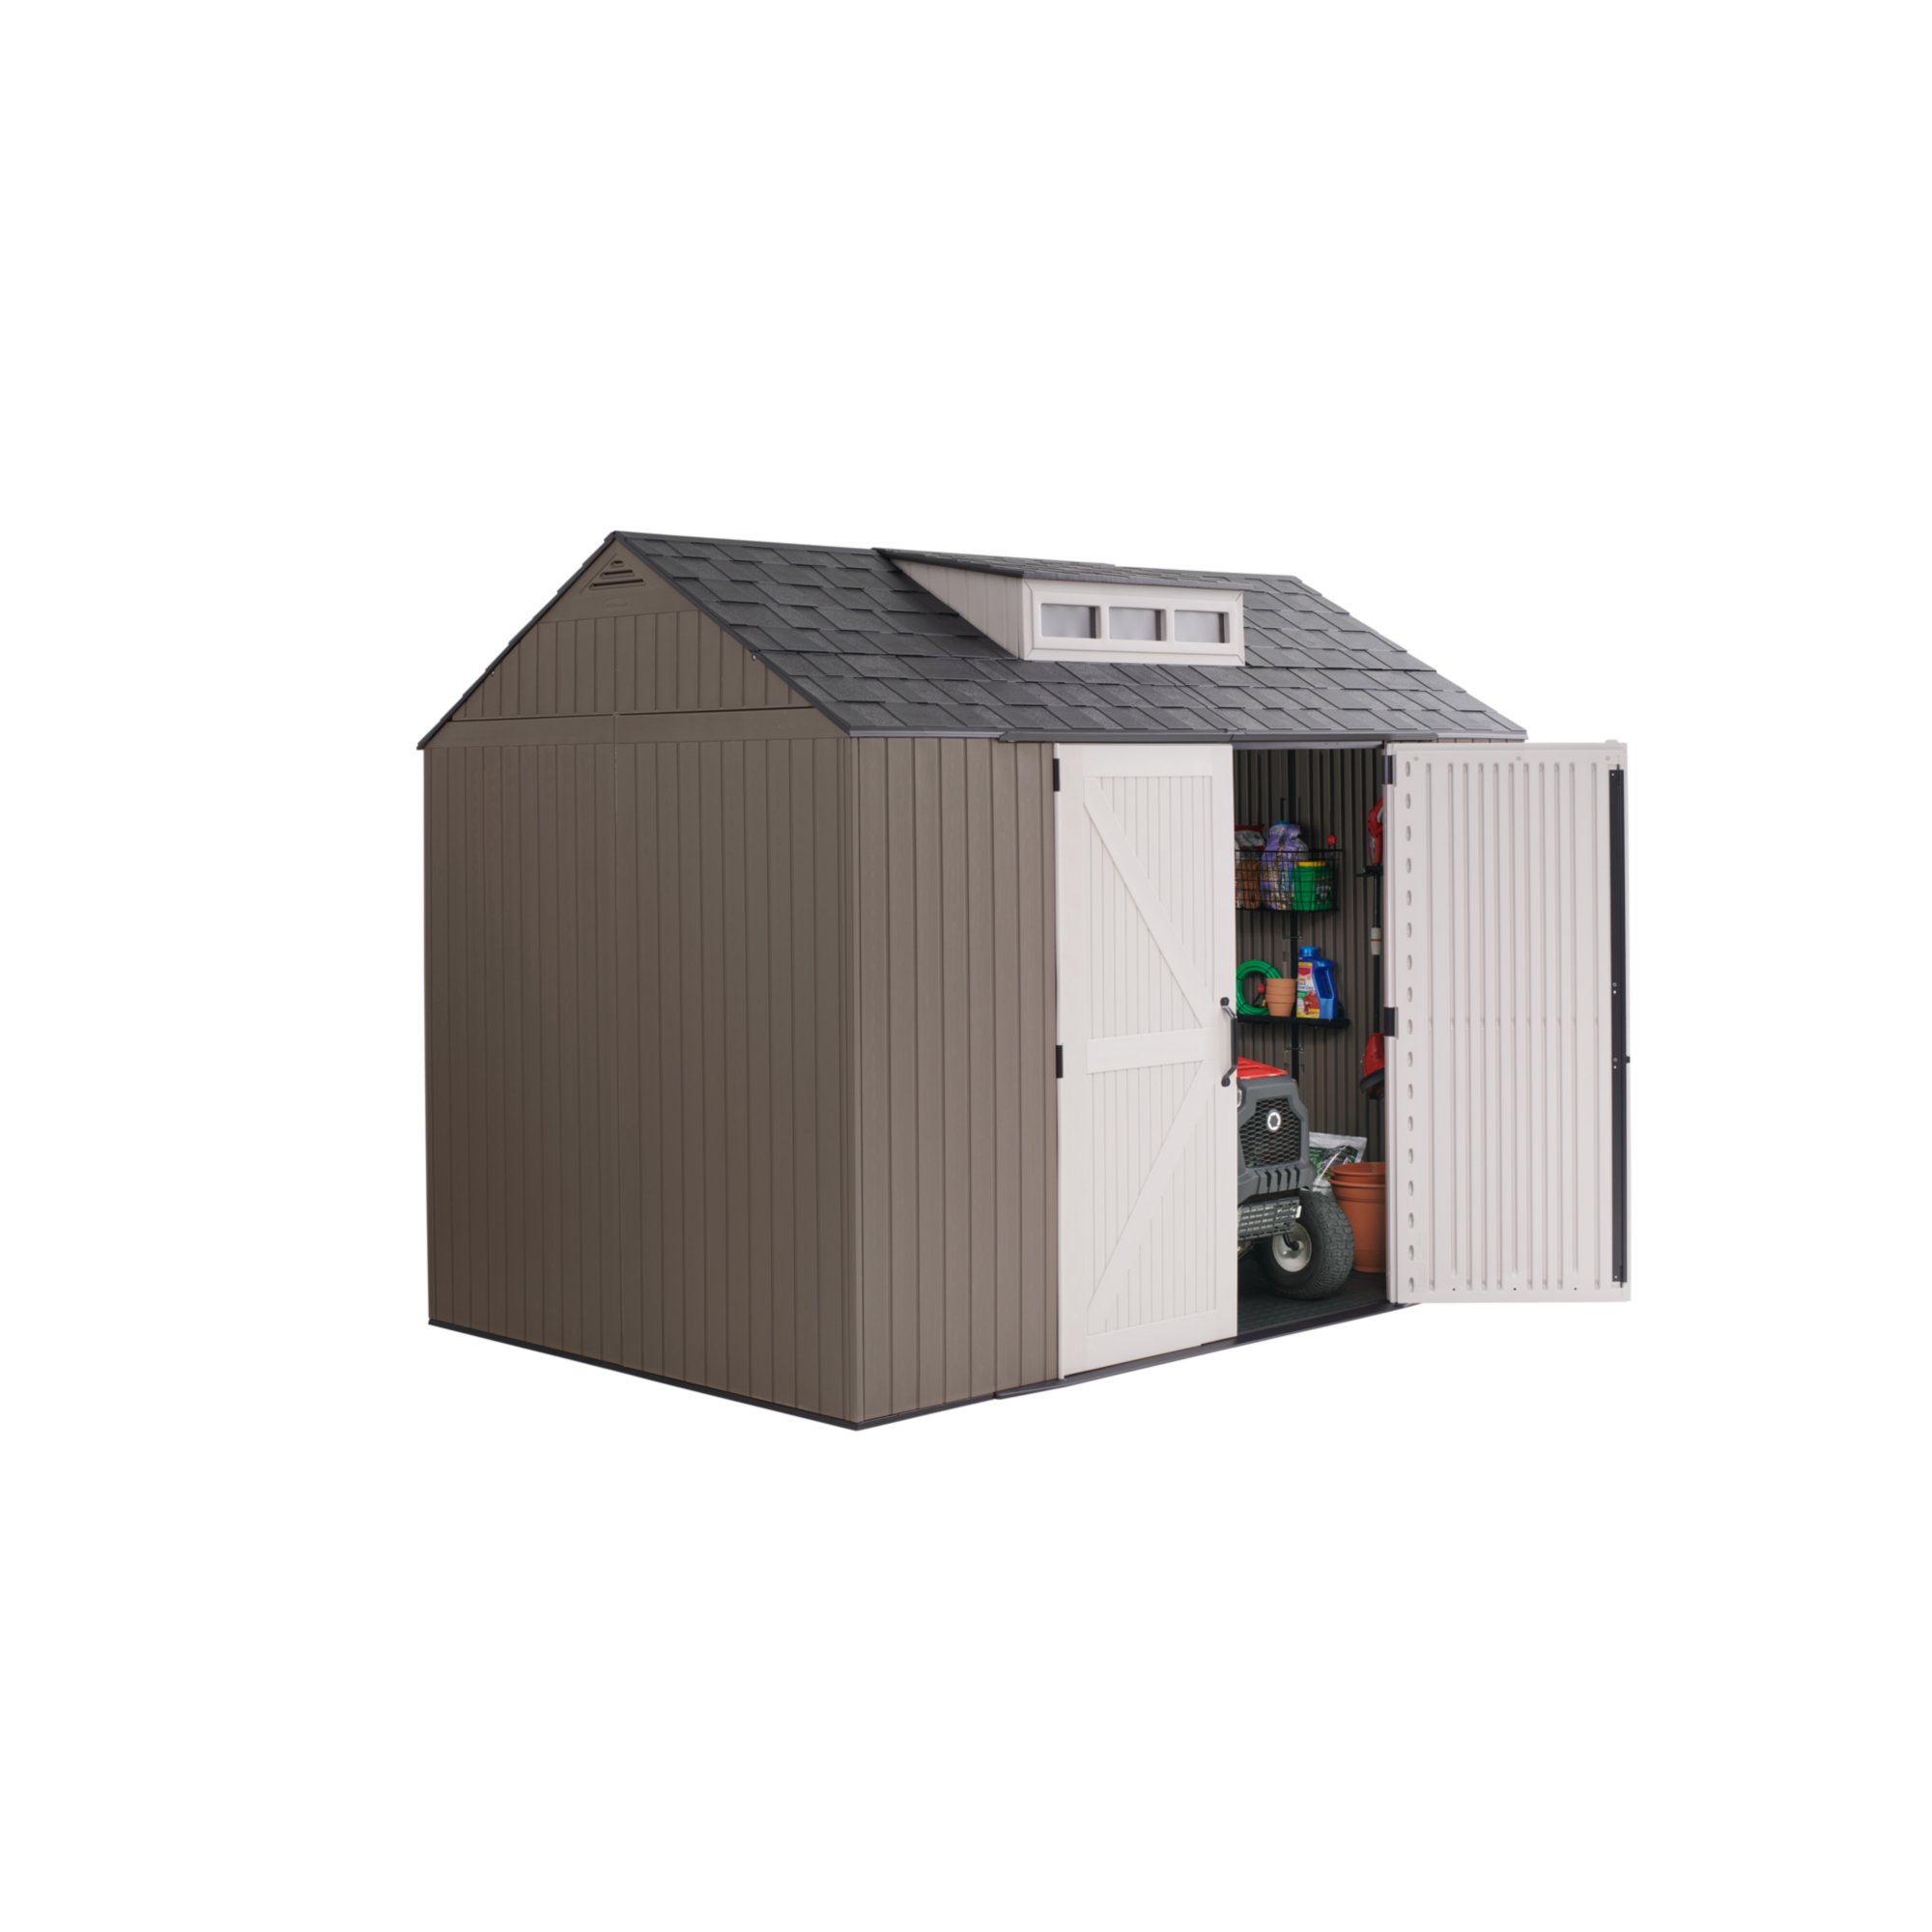 Rubbermaid 60-in x 79-in x 54-in Olive Resin Outdoor Storage Shed at